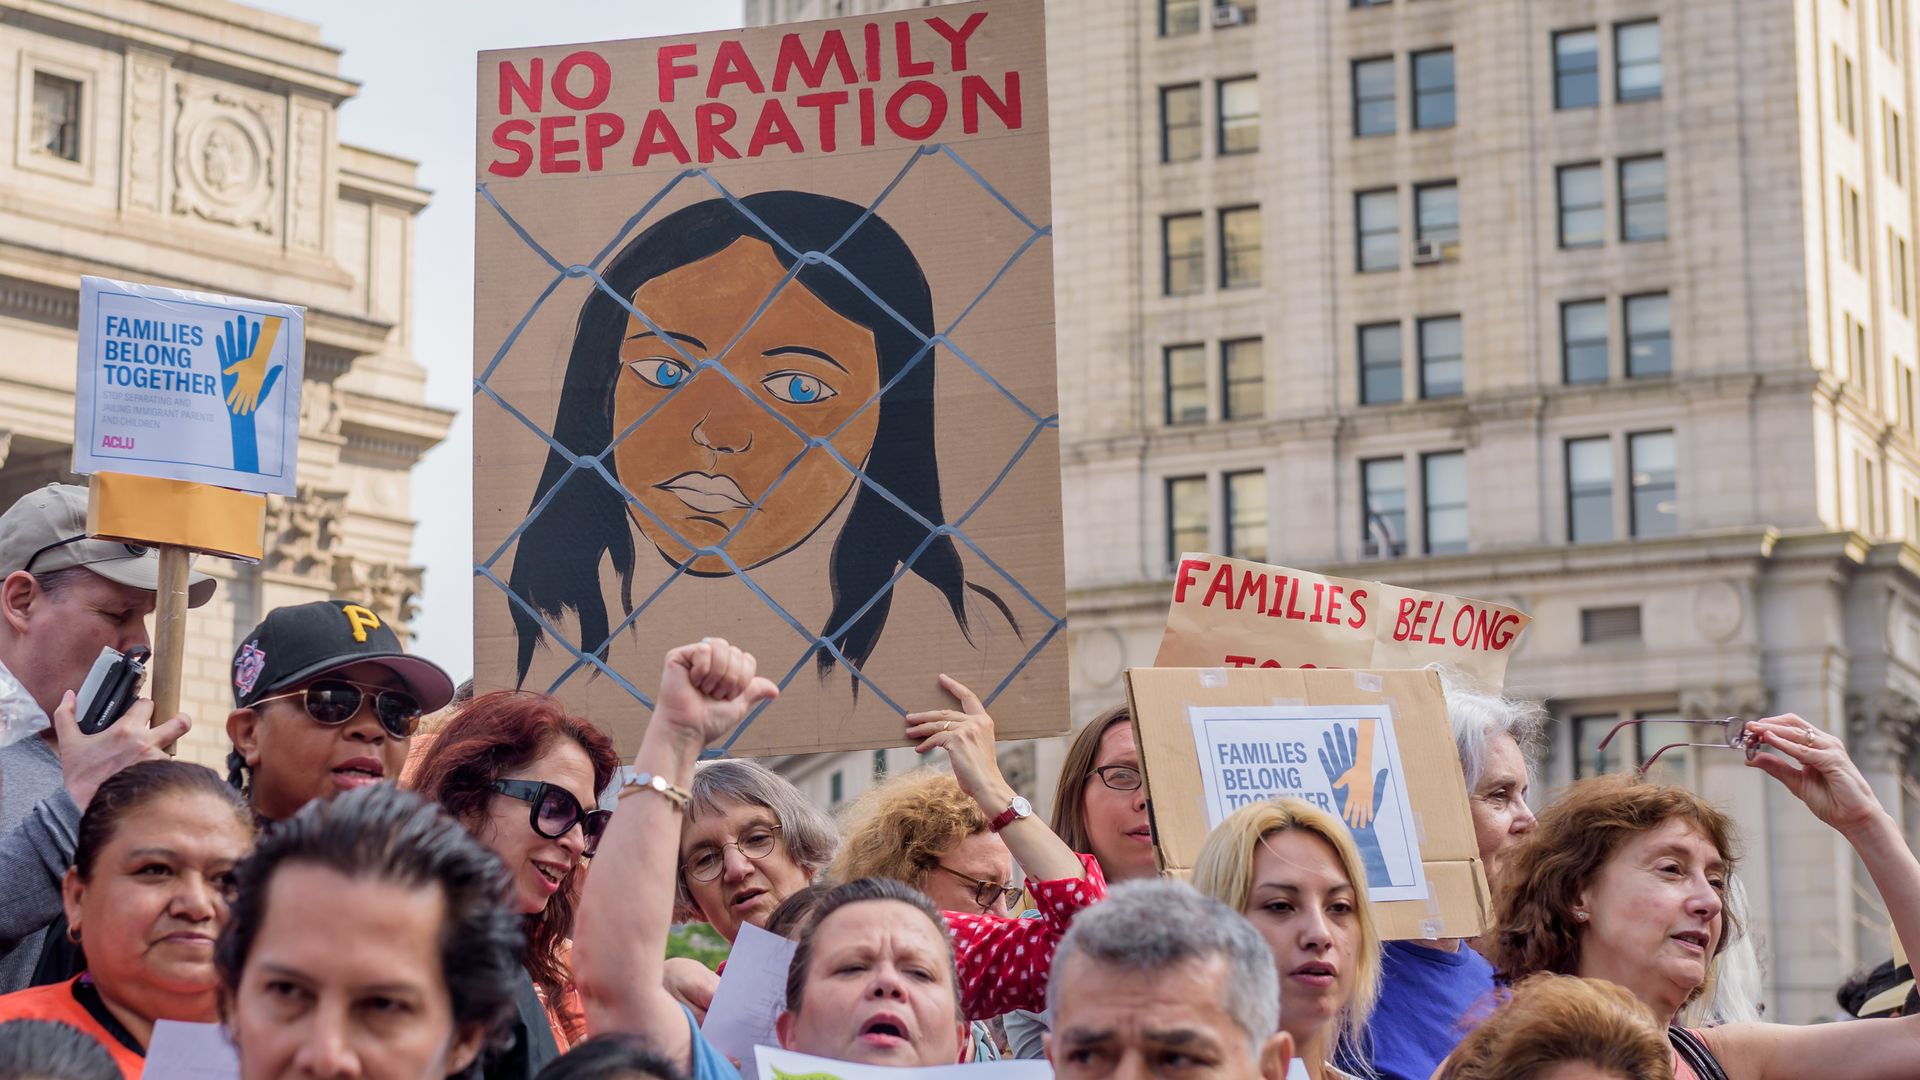 Protests against the separation of family immigrants. People holding signs that say "no family separation"